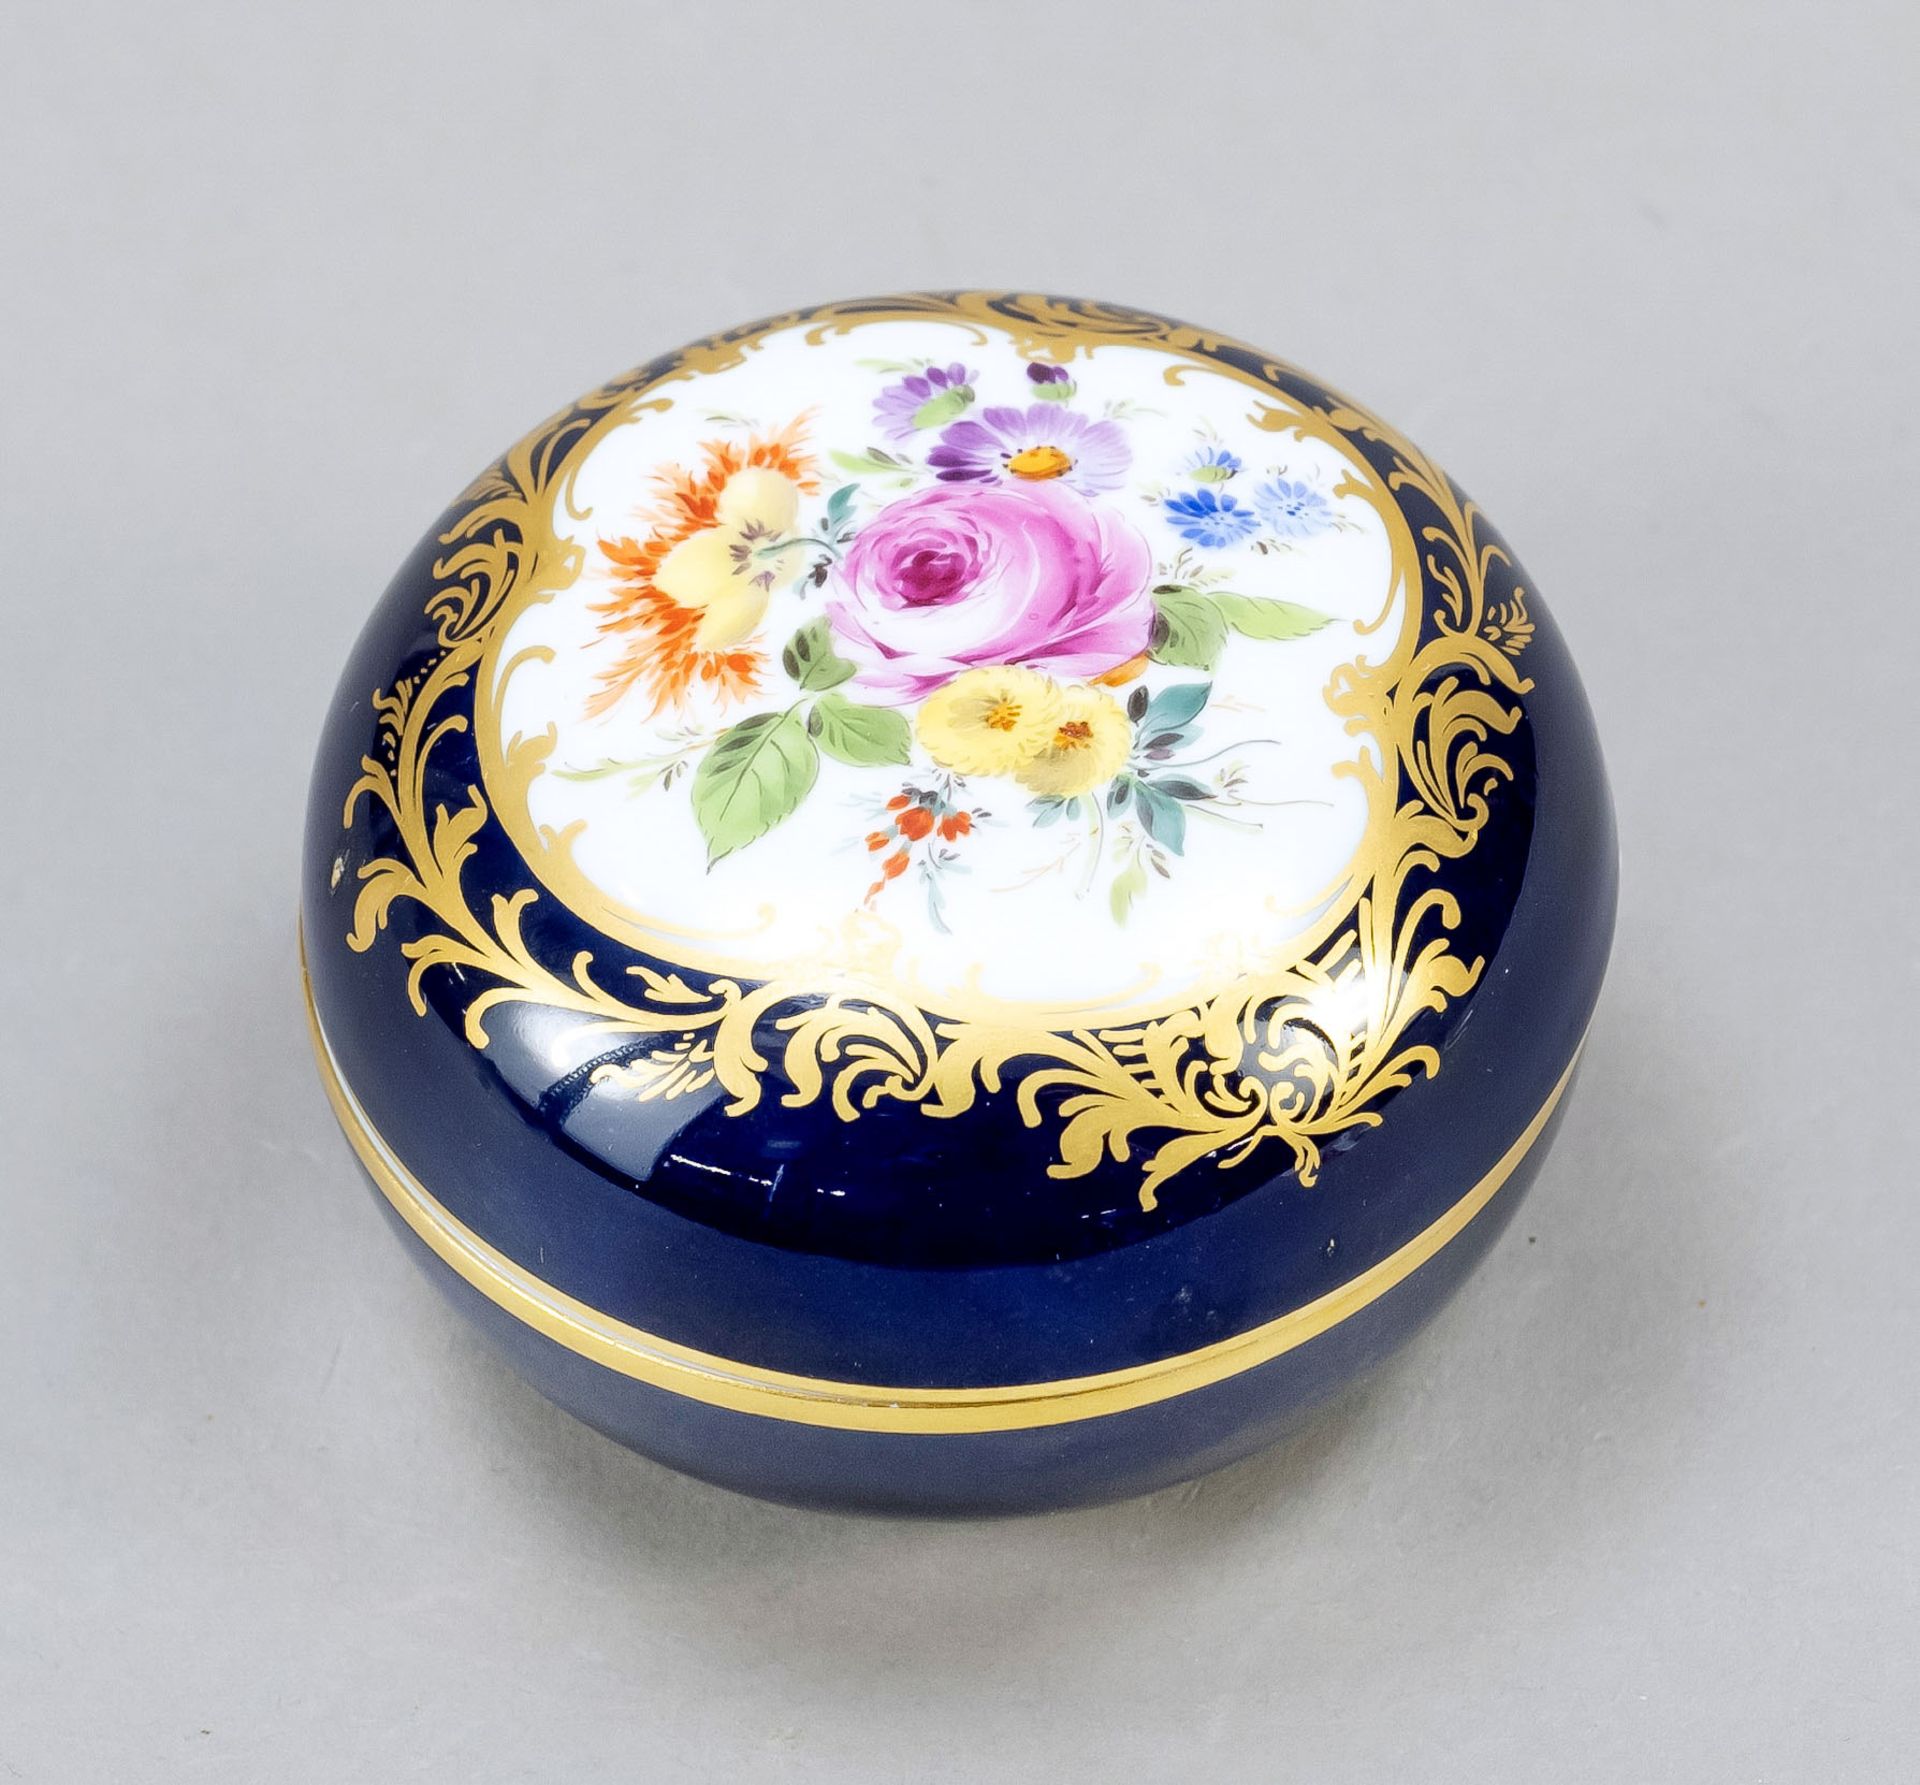 Small lidded box, Meissen, mark after 1934, 1st choice, round shape with domed lid, polychrome